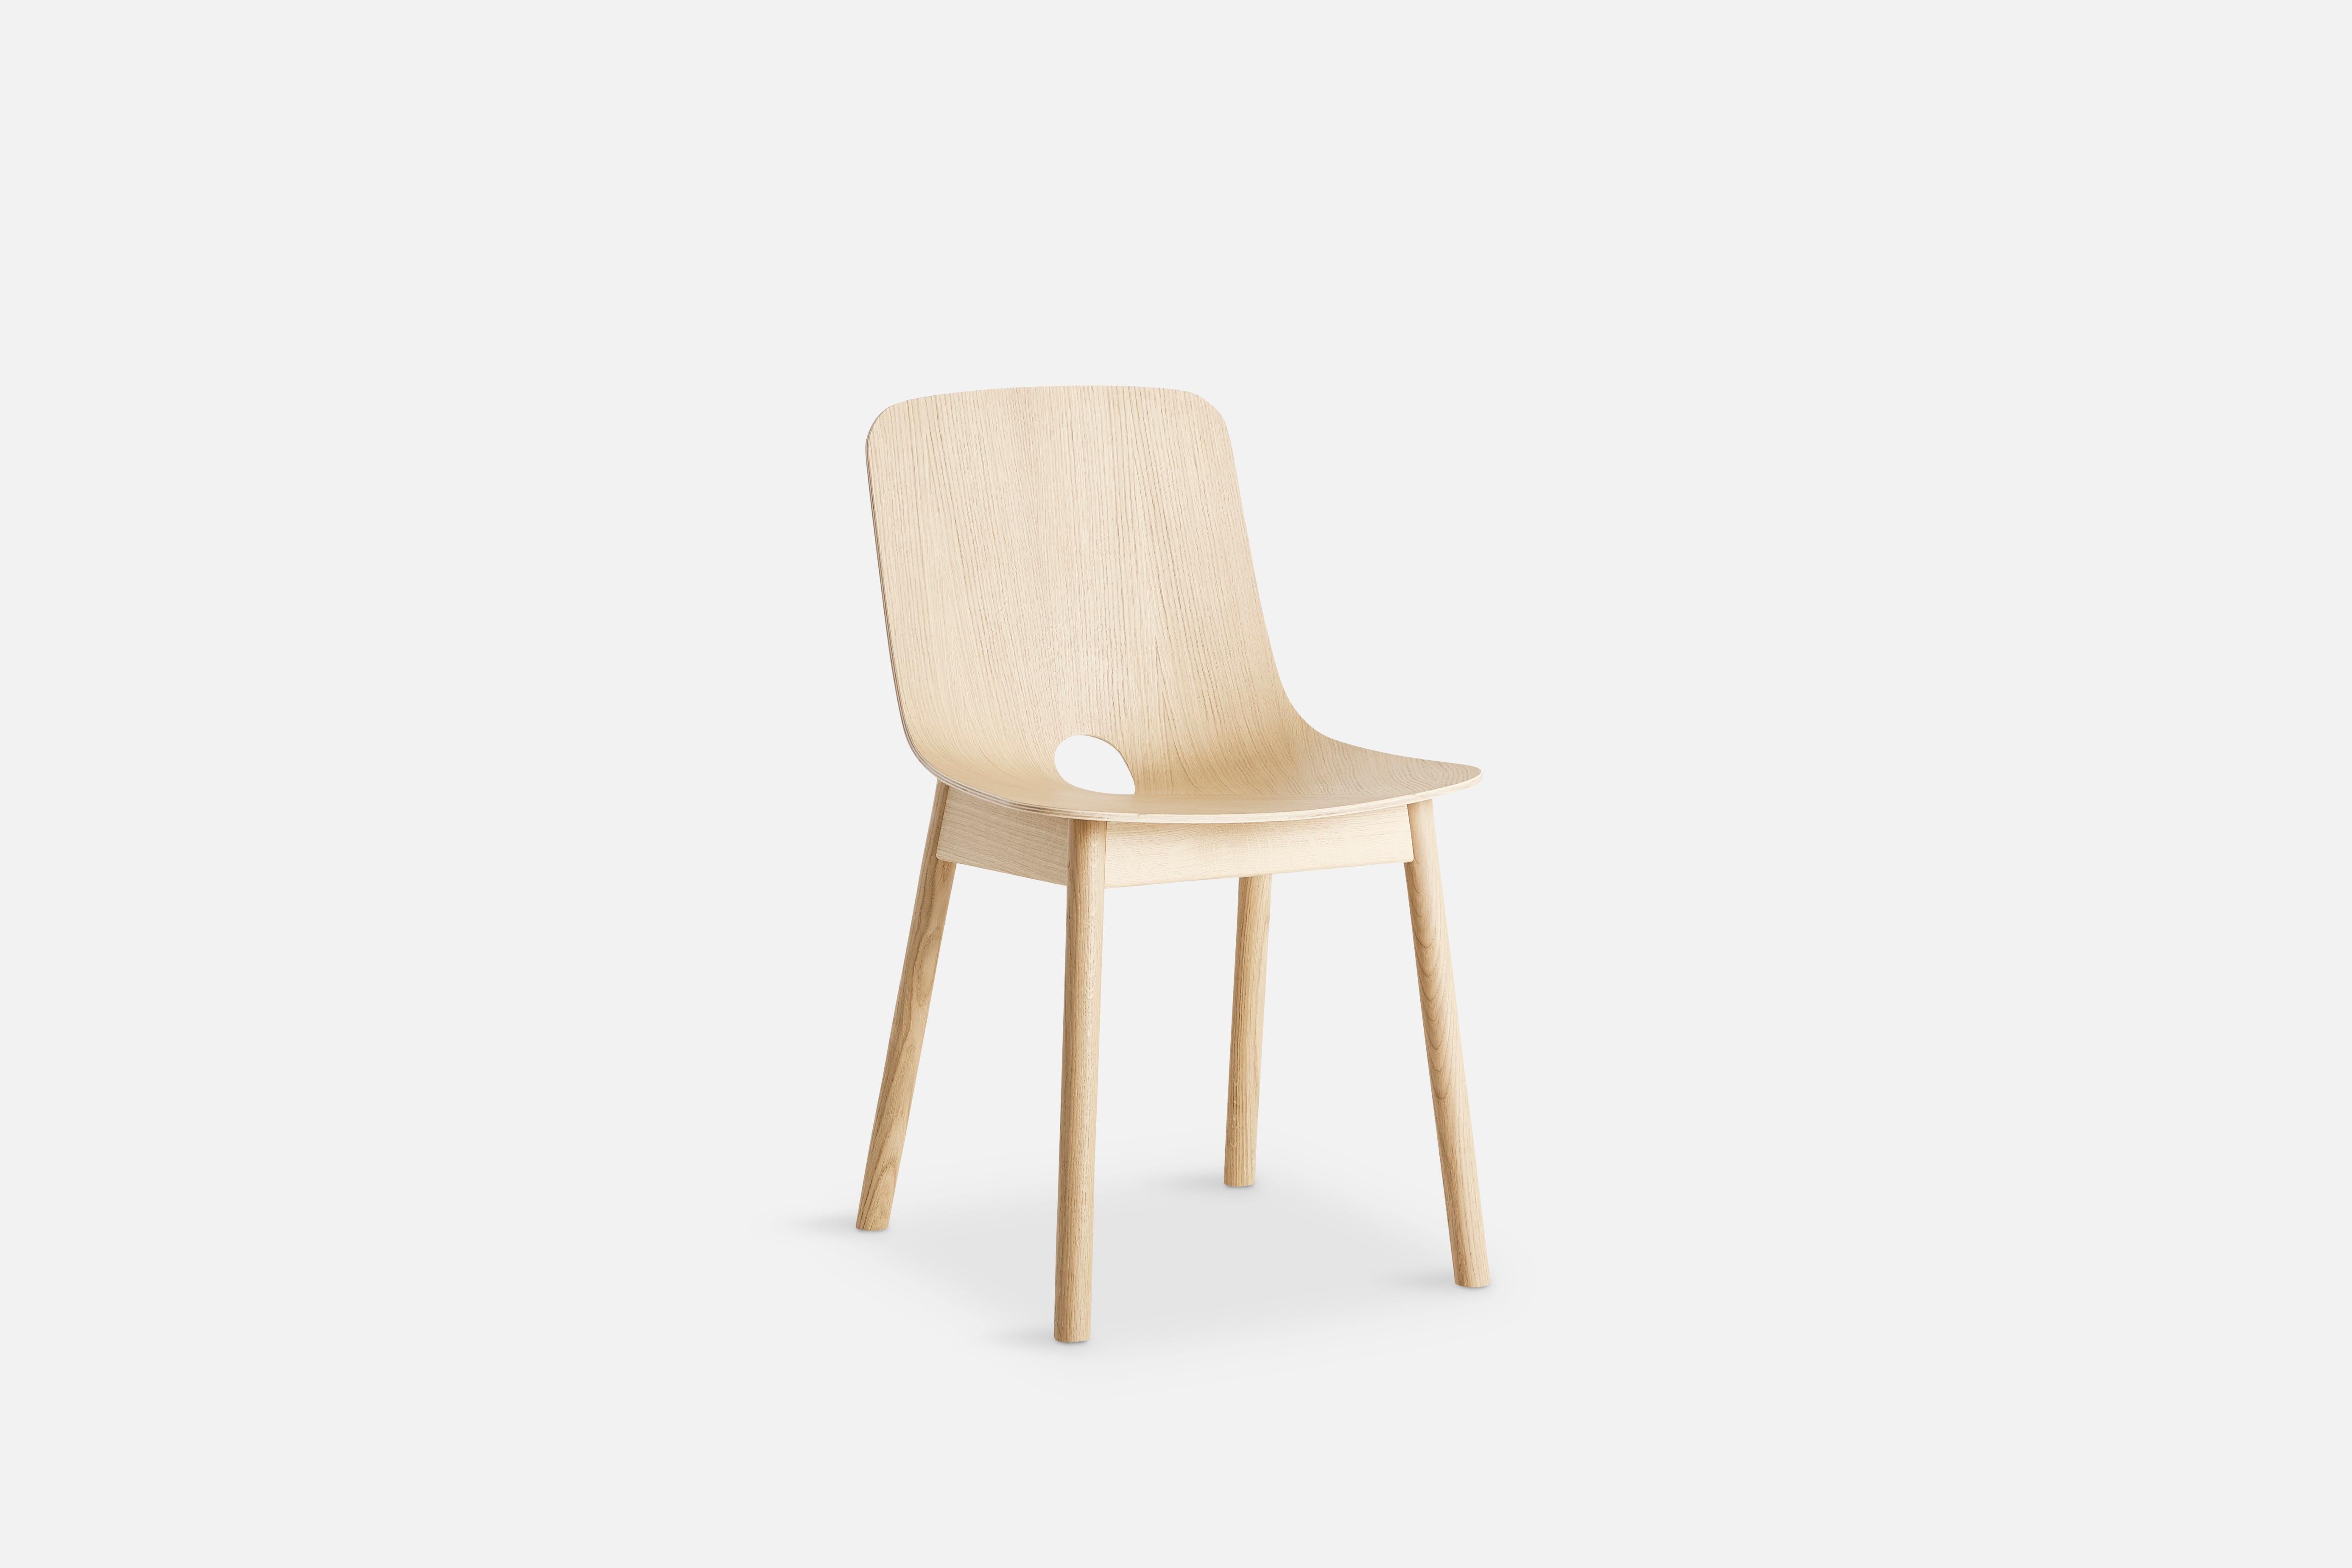 Mono white dining chair by Kasper Nyman.
Materials: Solid Oak, Oak Venner.
Dimensions: D 51 x W 45 x H 78 cm.

WOUD
The founders, Mia and Torben Koed, decided to put their 30 years of experience into a new project. It was time for a change and